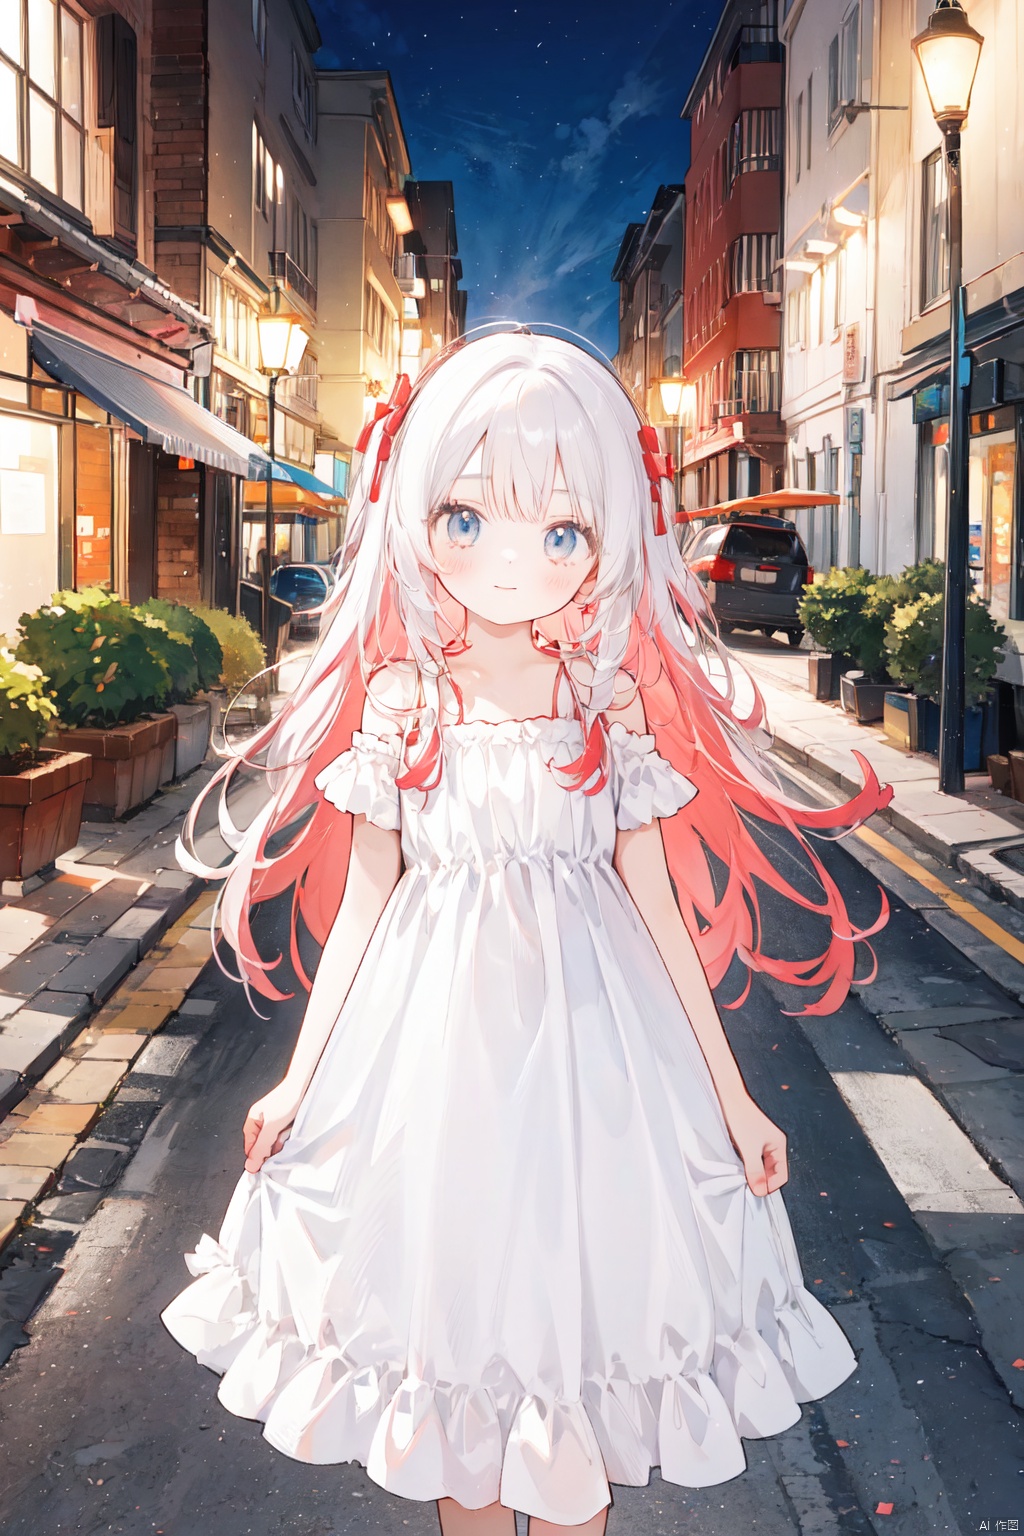  A petite, young girl with long red hair and a white dress walks on the gray street under the glow of the street lamps. As she looks up at the camera, her gaze reflects the light, creating a gentle glow that captivates the audience.